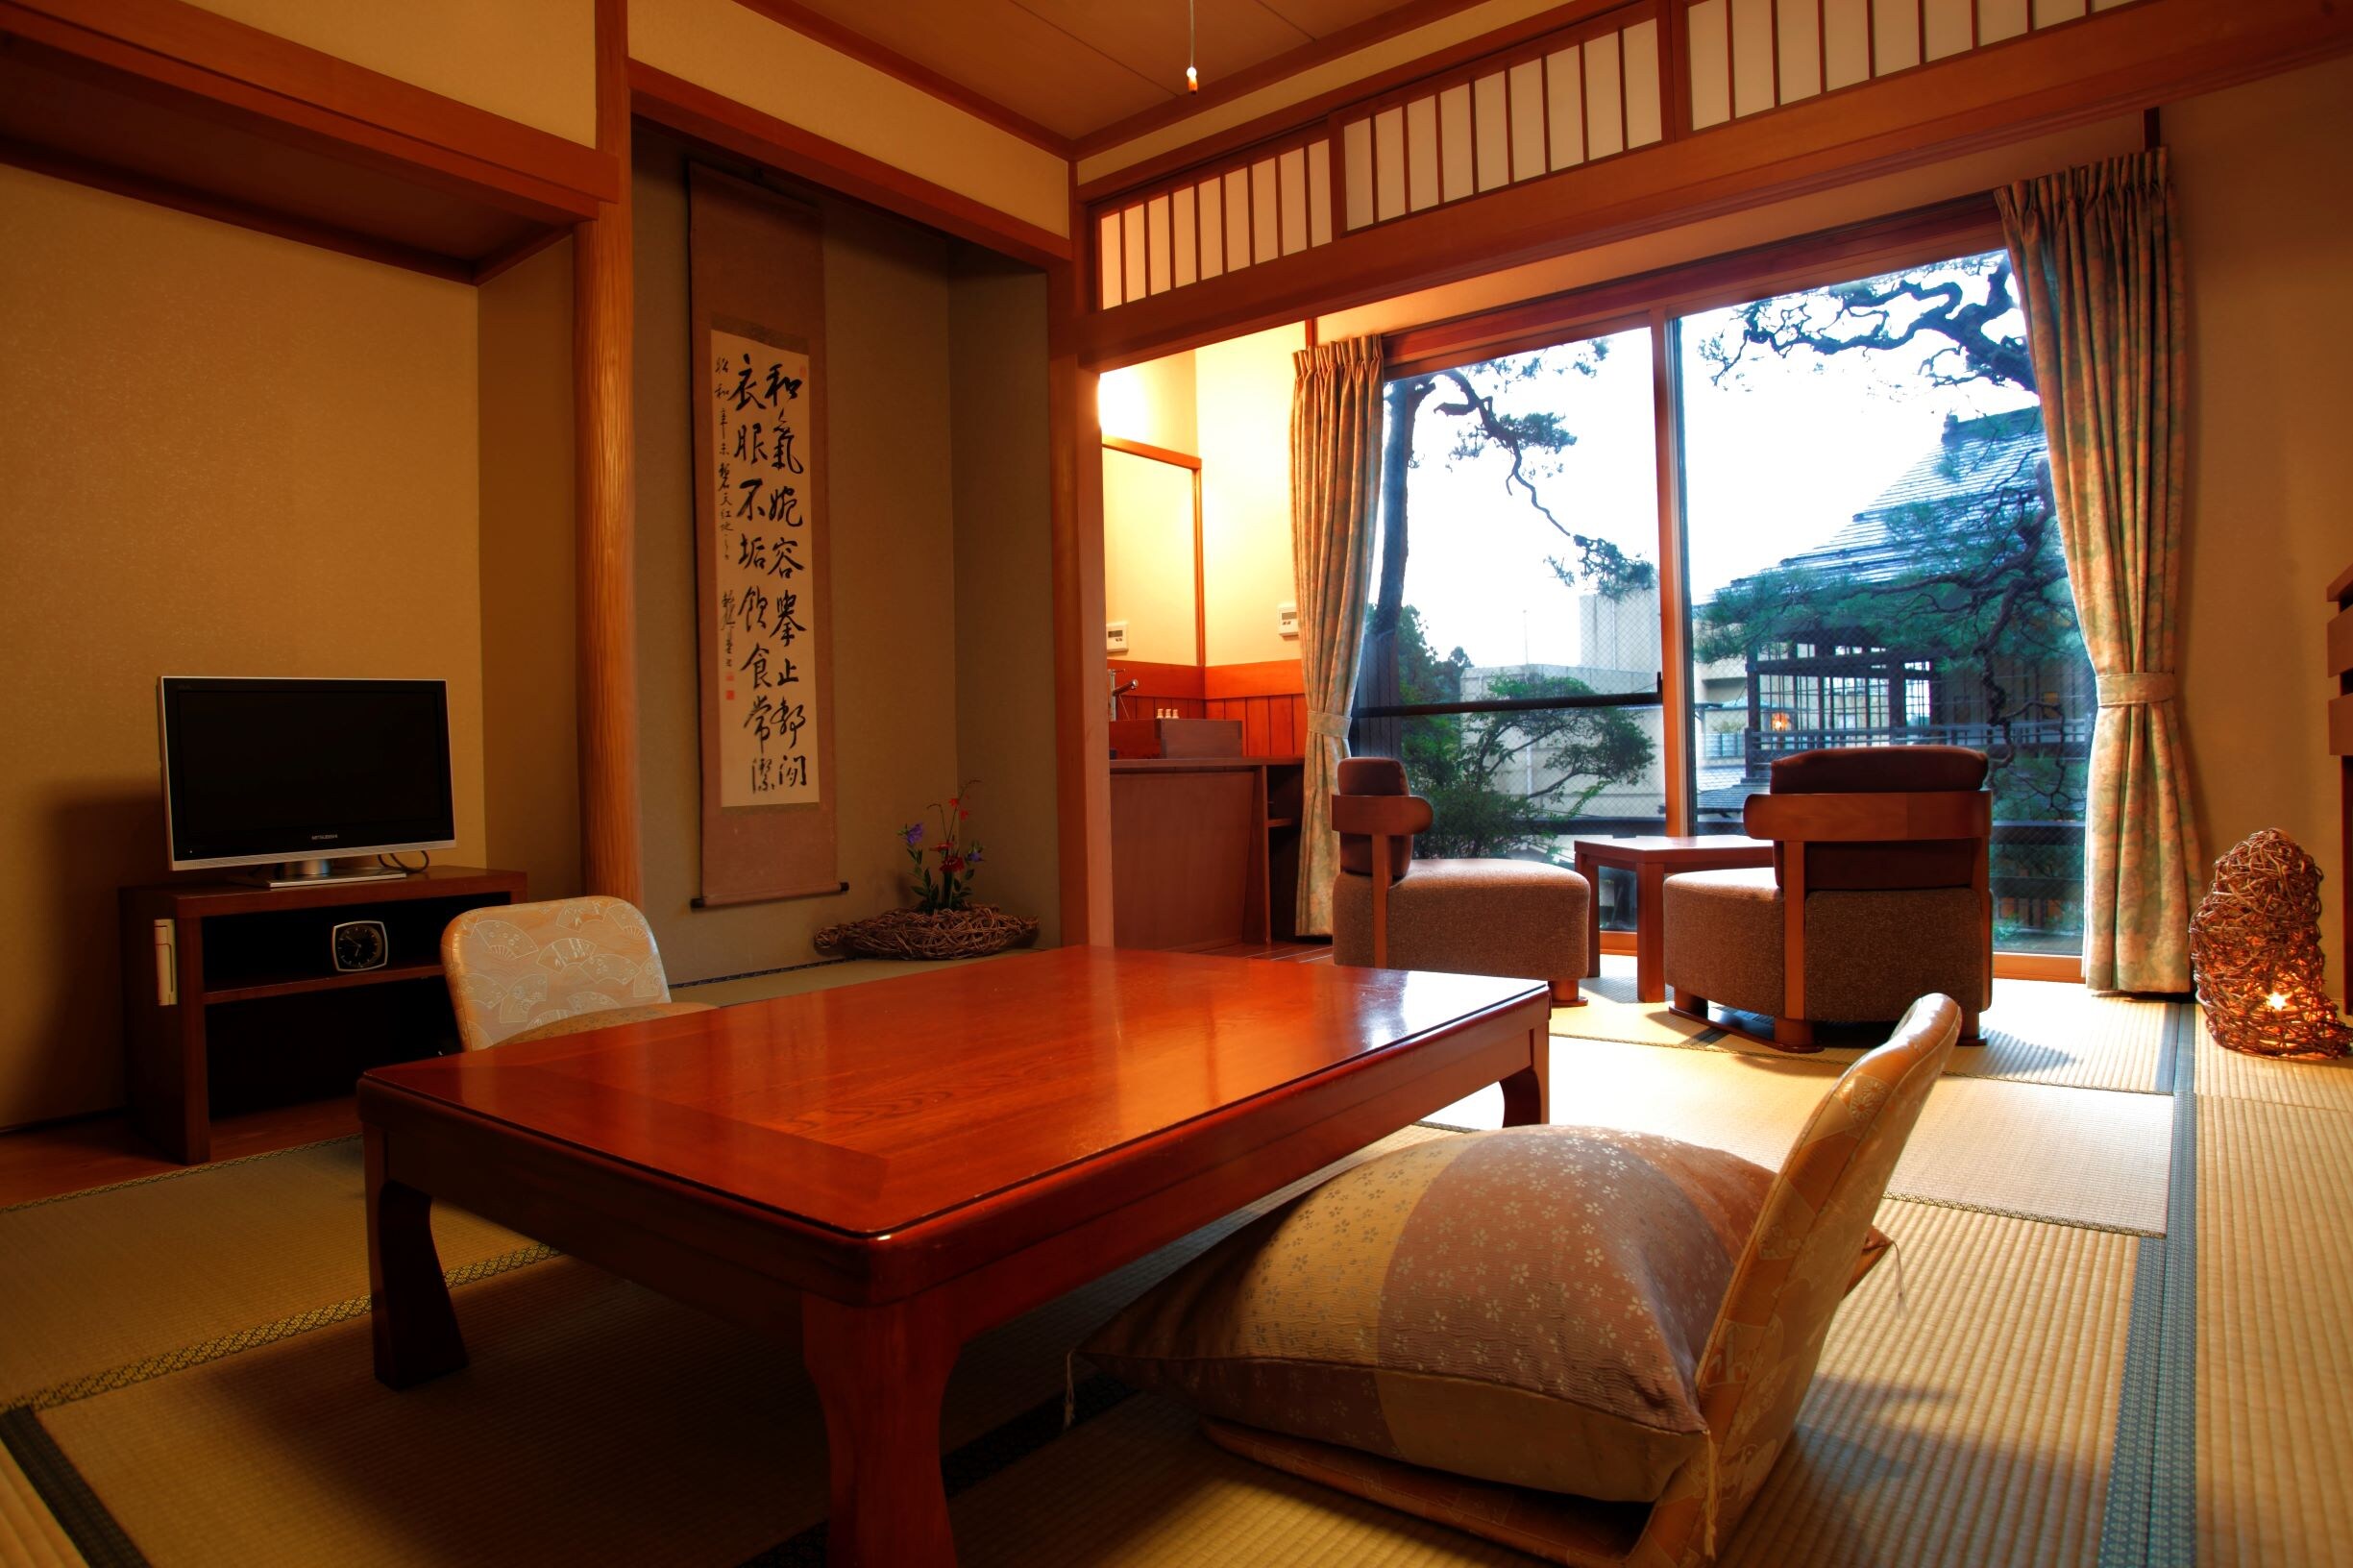 Popular Japanese-style room with many repeaters, 10 tatami mats